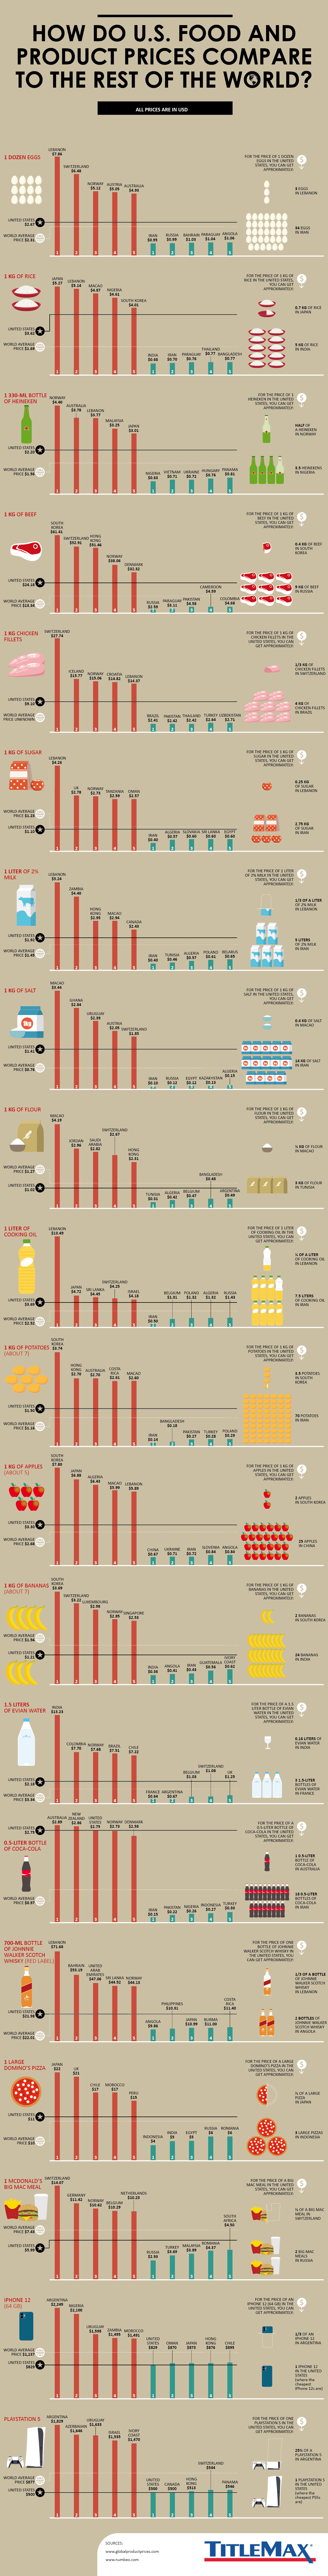 How Do U.S. Food and Product Prices Compare to the Rest of the World?